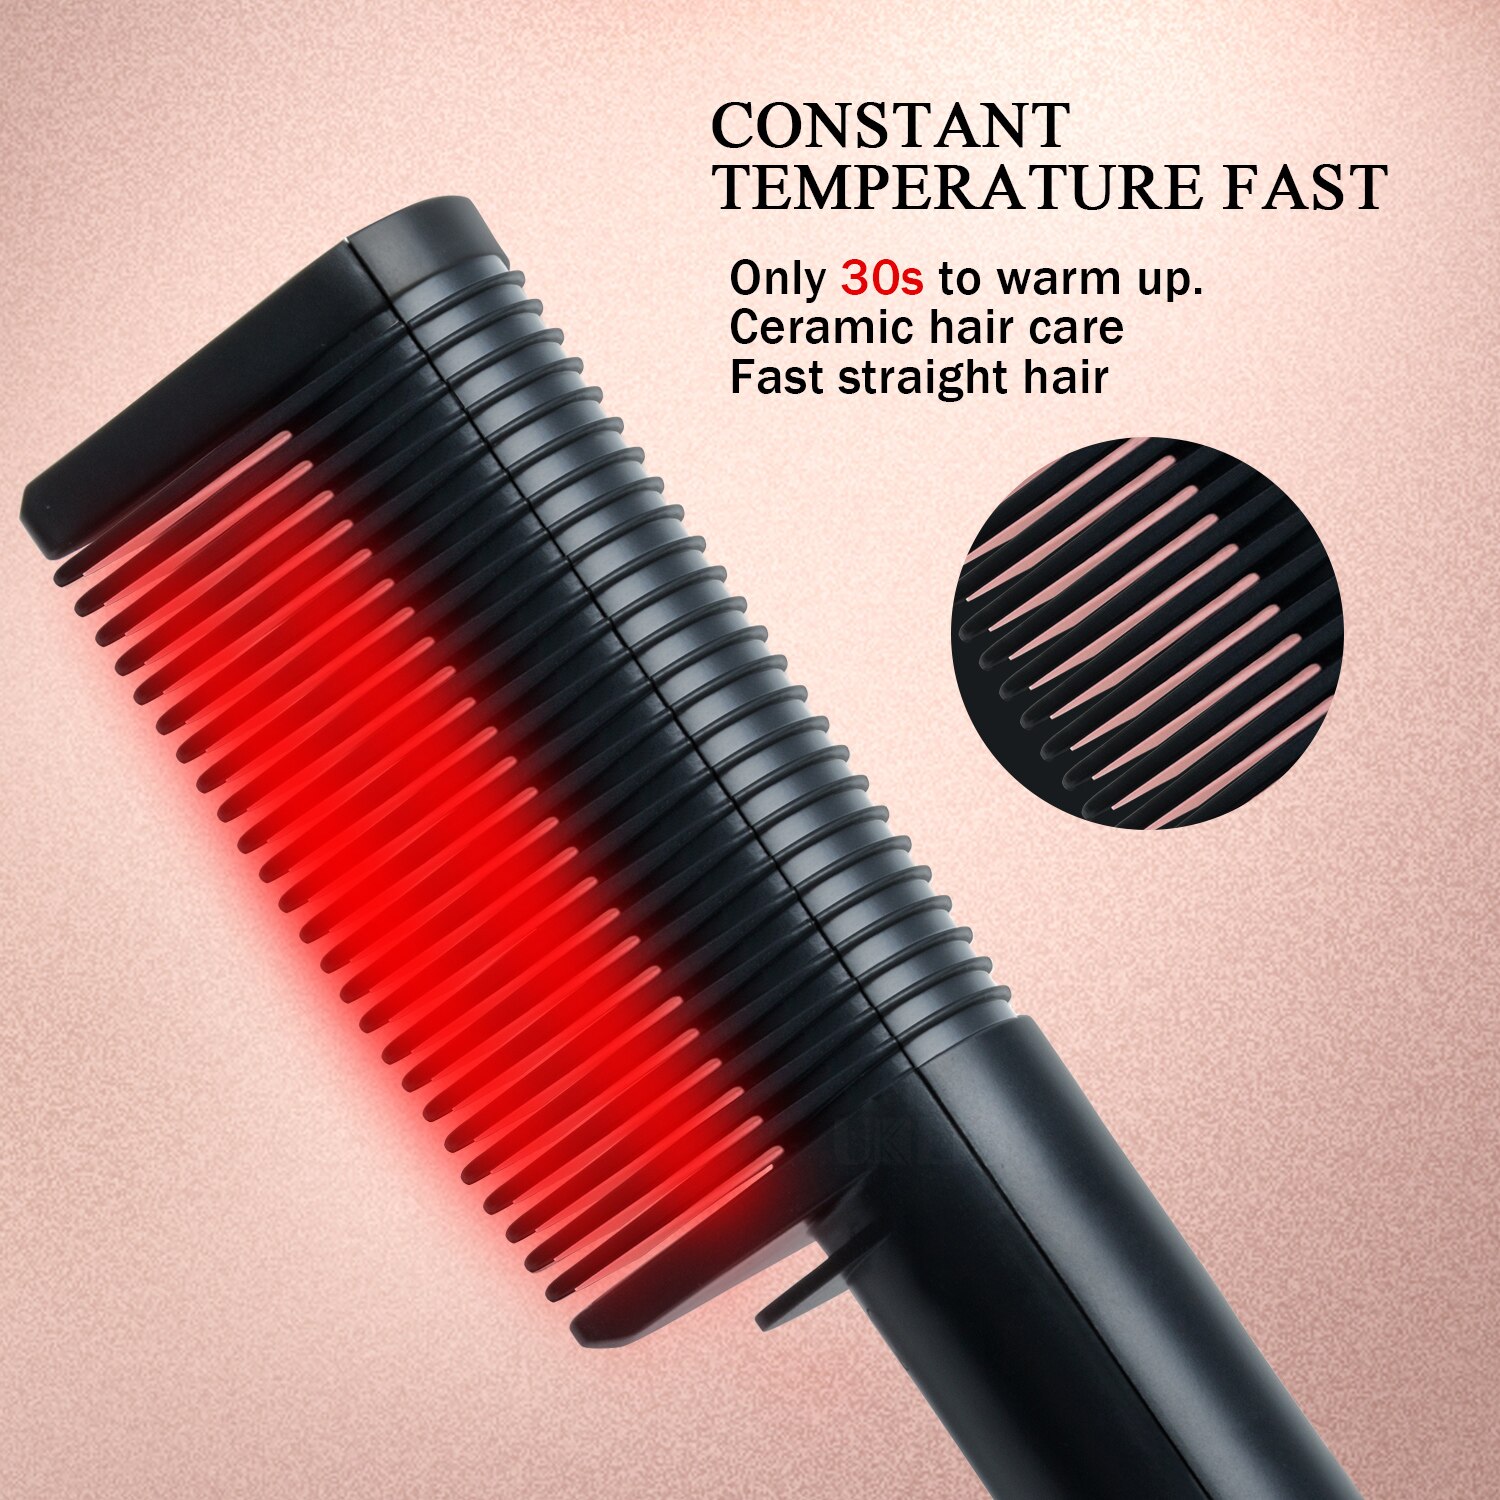 Newly Electric Hair Straightening Brush and Curler Comb Ceramic Ionic Anti Frizz&Scald Beauty Hair Styling Tool